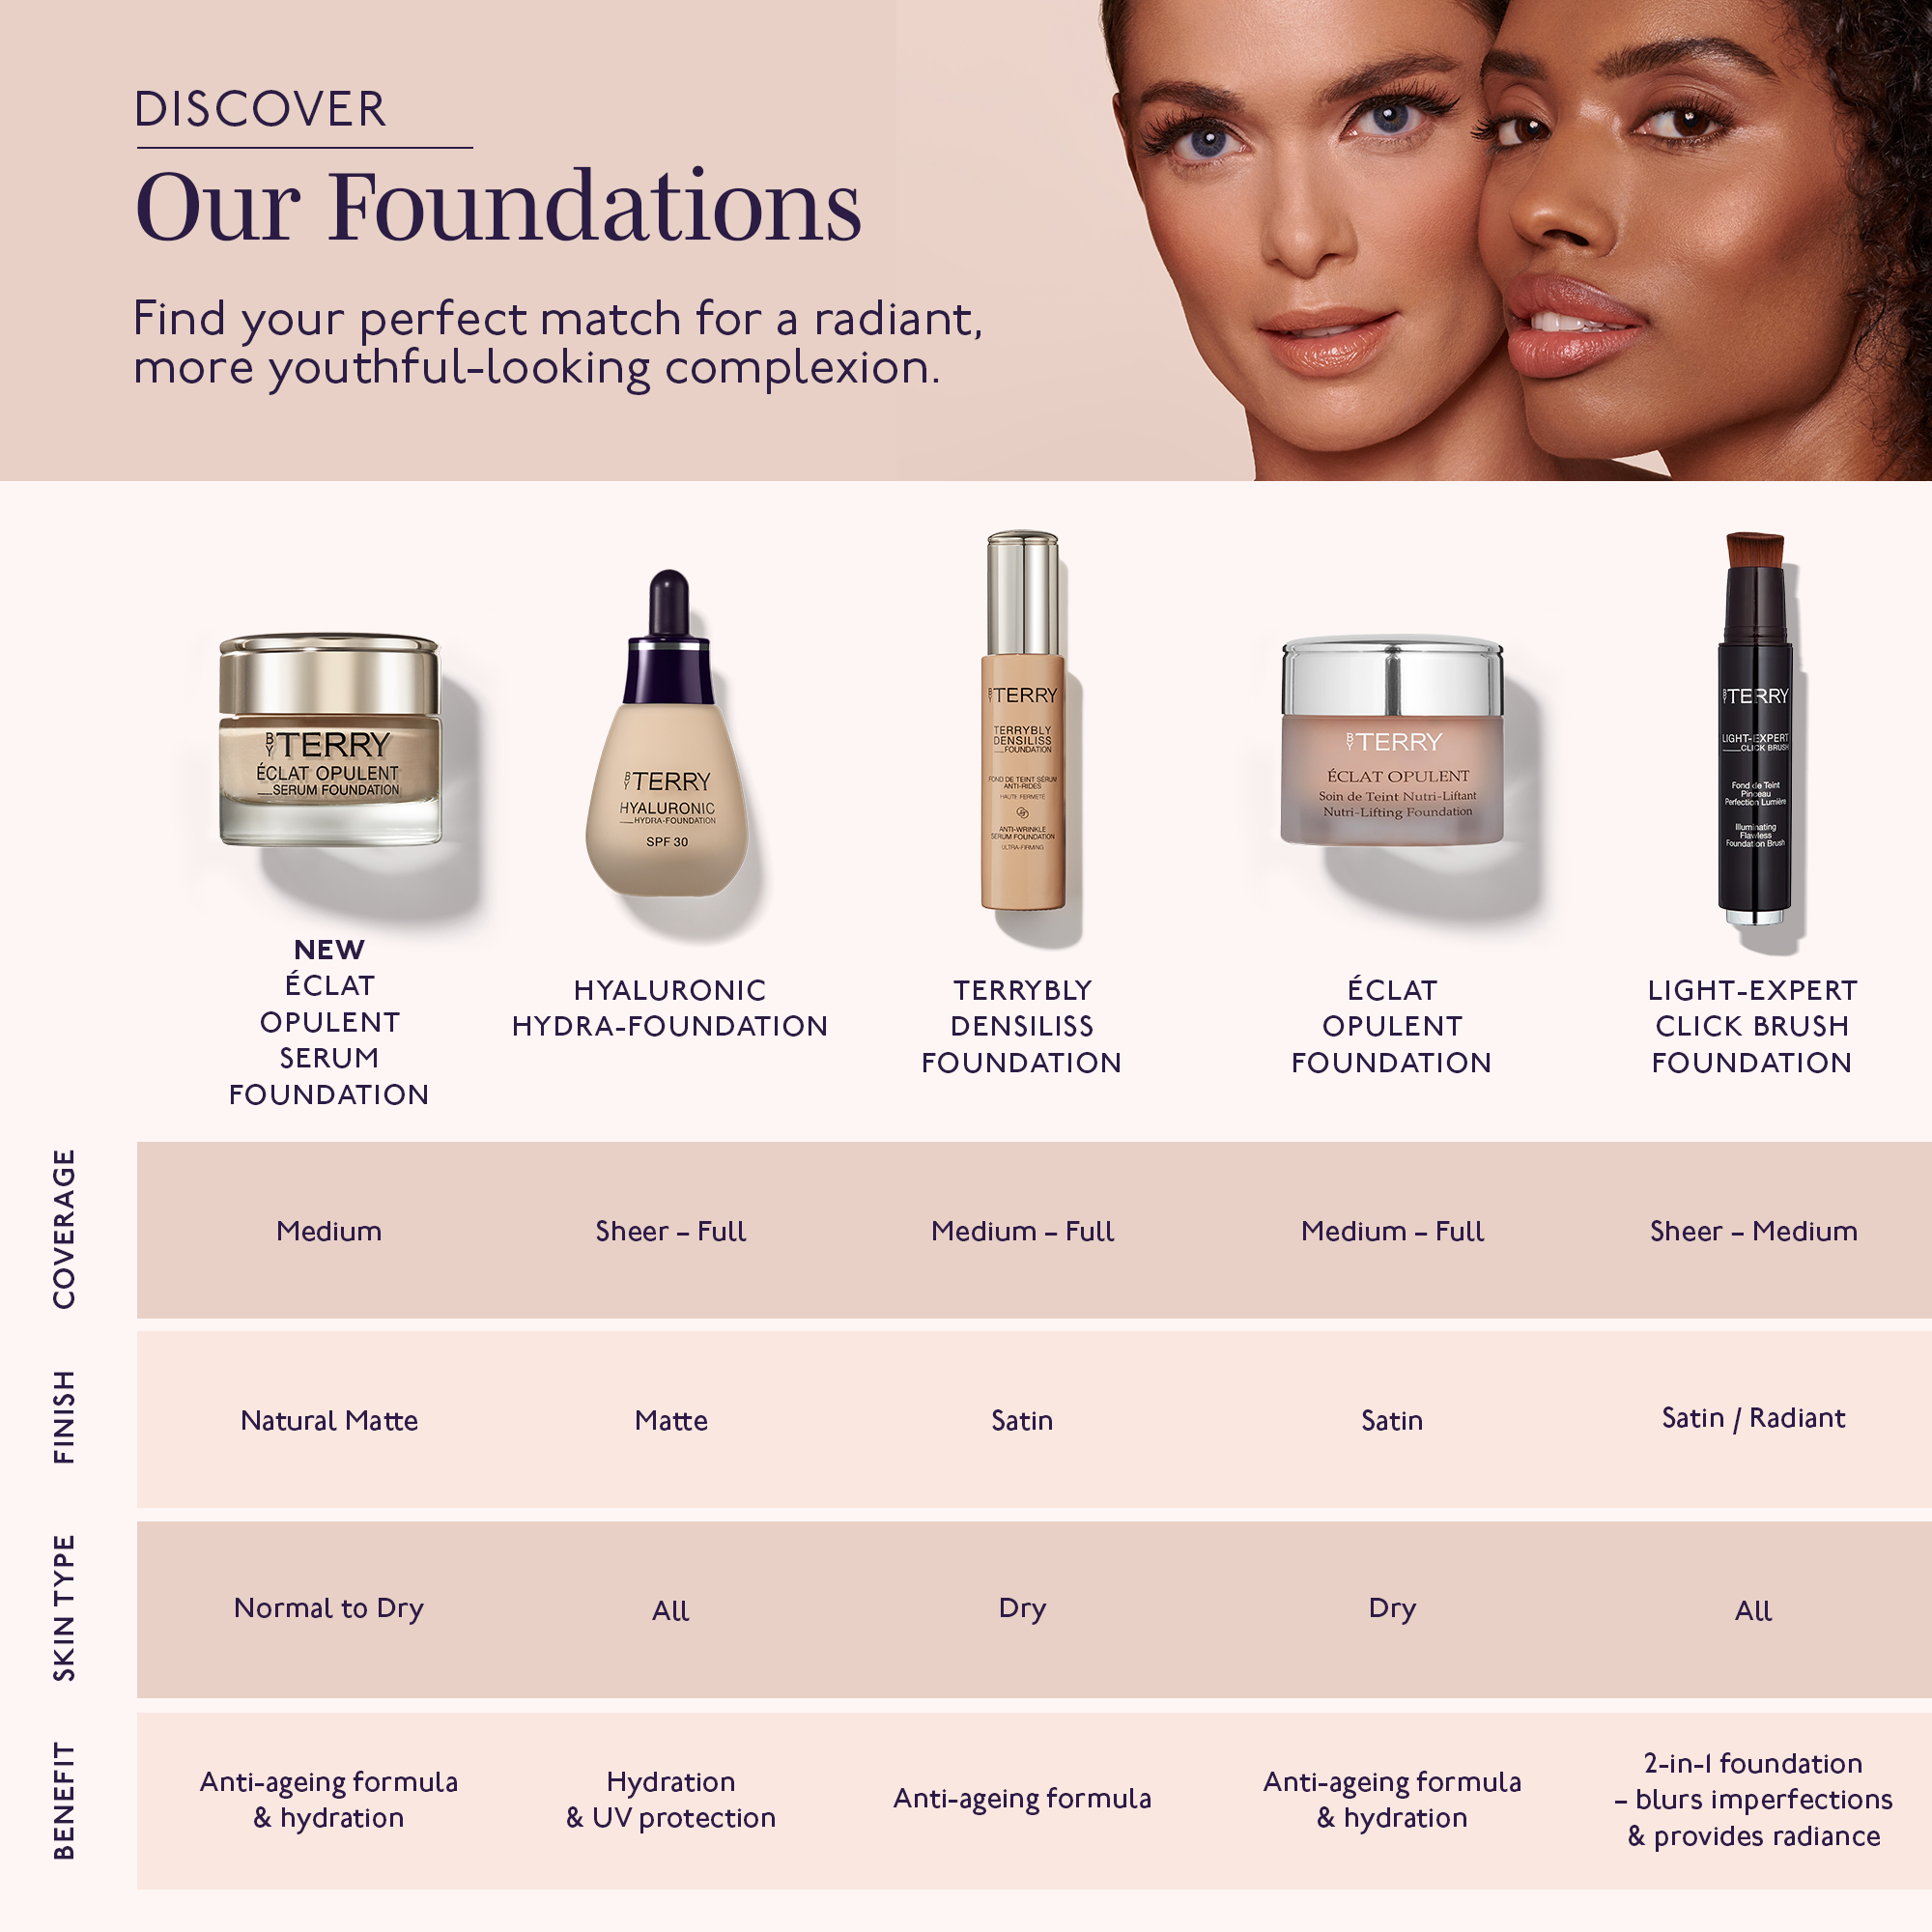 Discover our foundations, find your perfect match for a more radiant, youthful-looking complexion